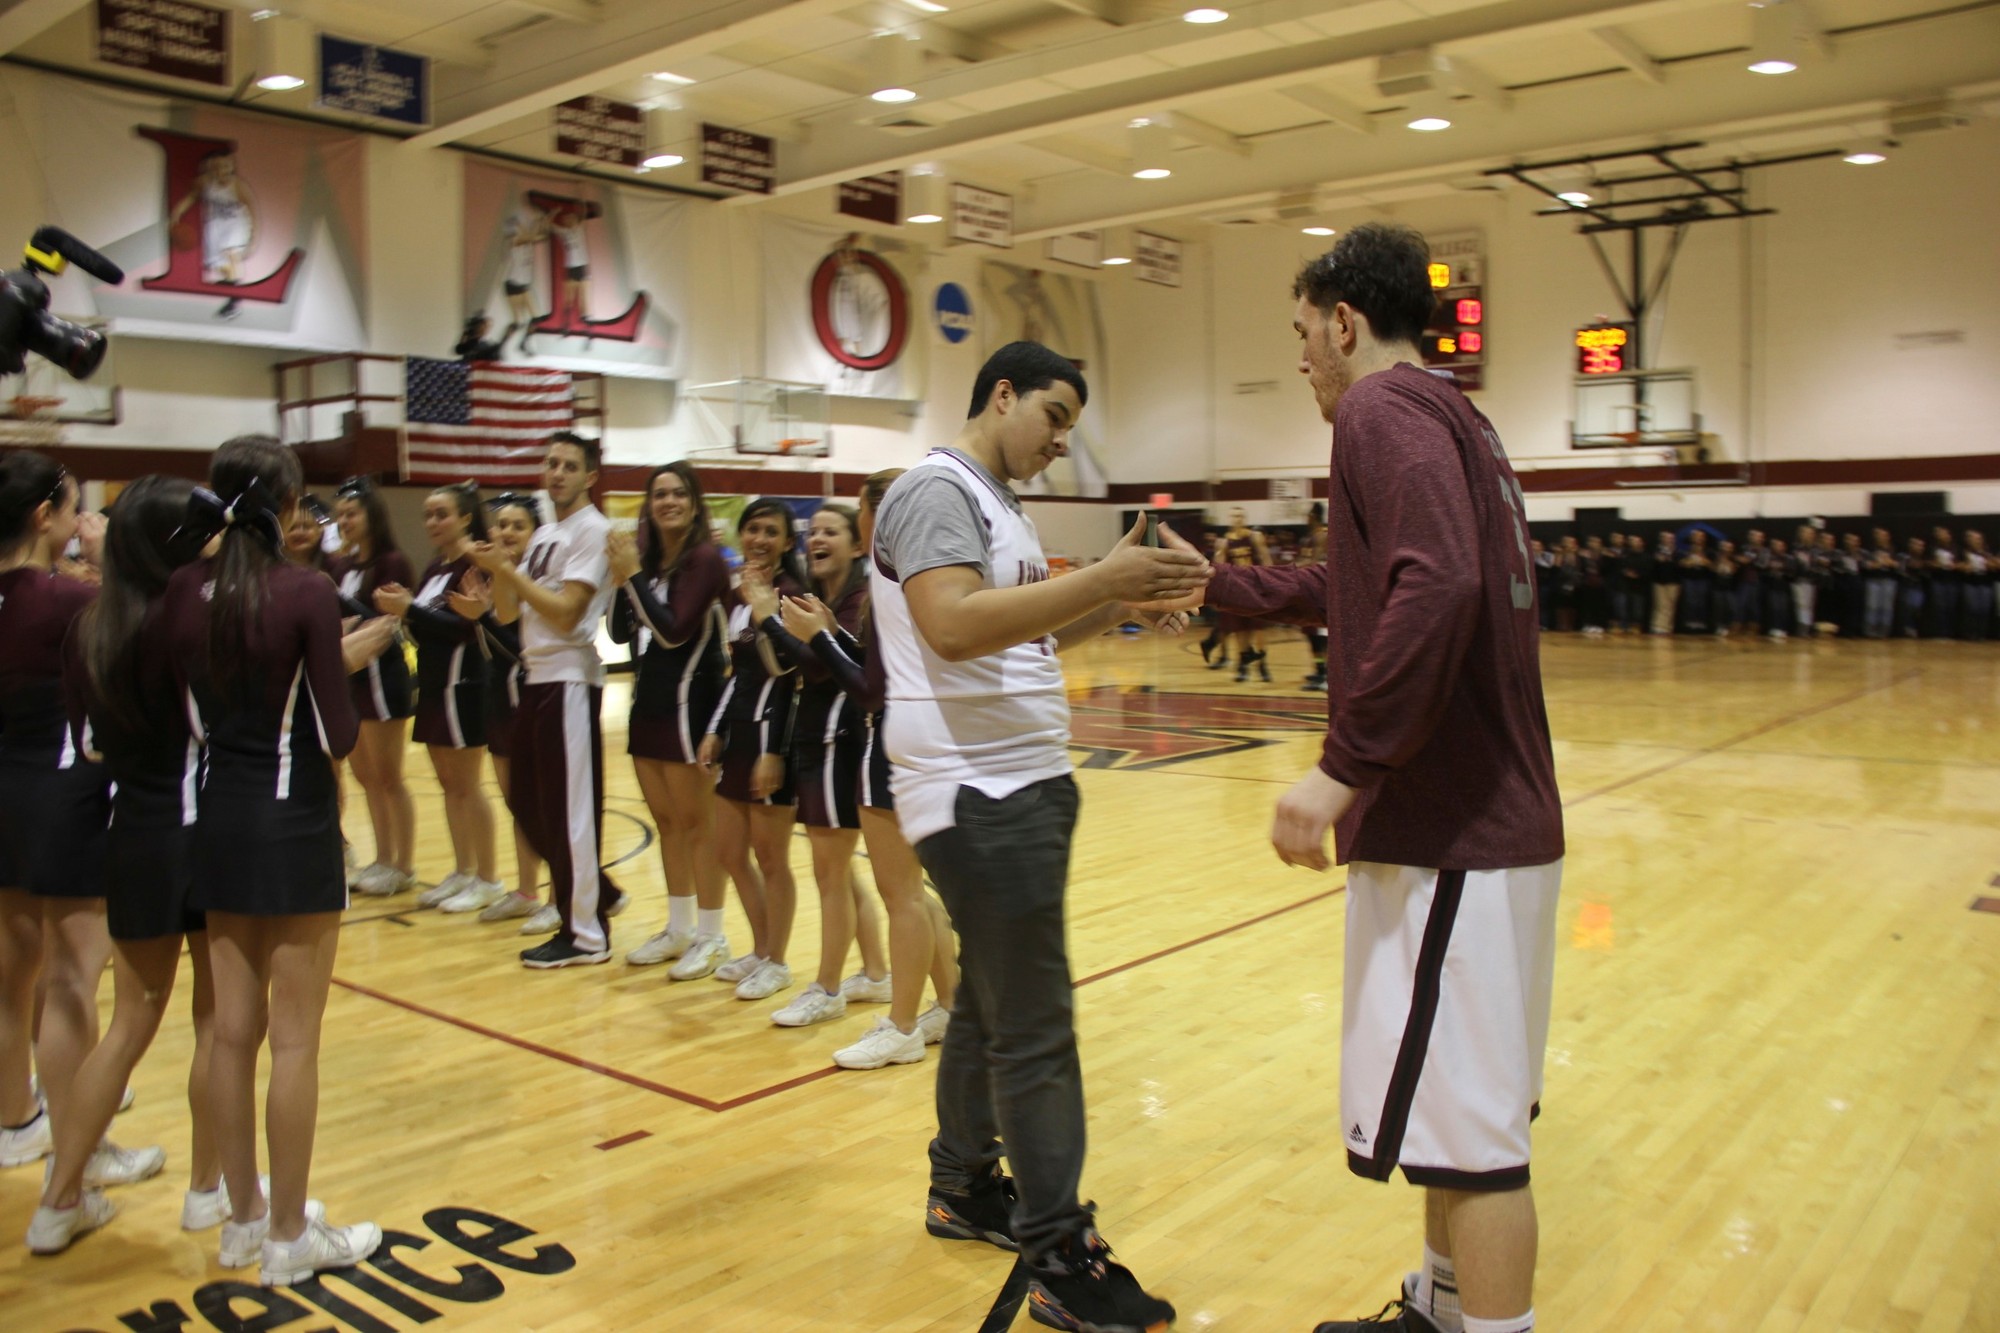 Alexander Perez, 14, left, was welcomed by Molloy basketball player Charlie Marquardt to the team. Molloy made Perez an honorary member of the team in conjunction with the Make-A-Wish Foundation.